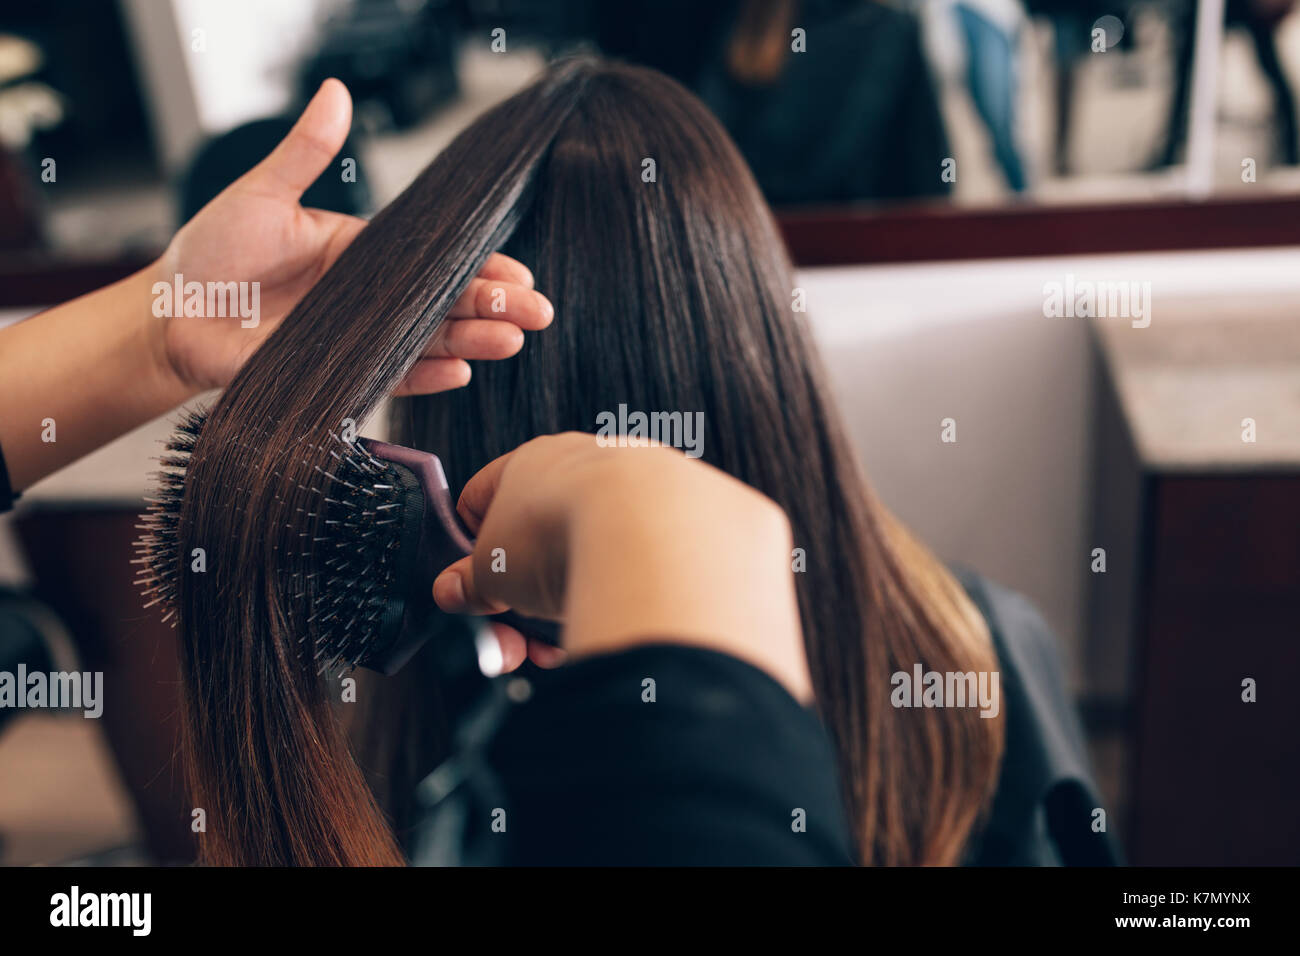 Professional hairdresser styling the hair of a customer at salon. Female hair stylist combing hair using a hair brush. Stock Photo